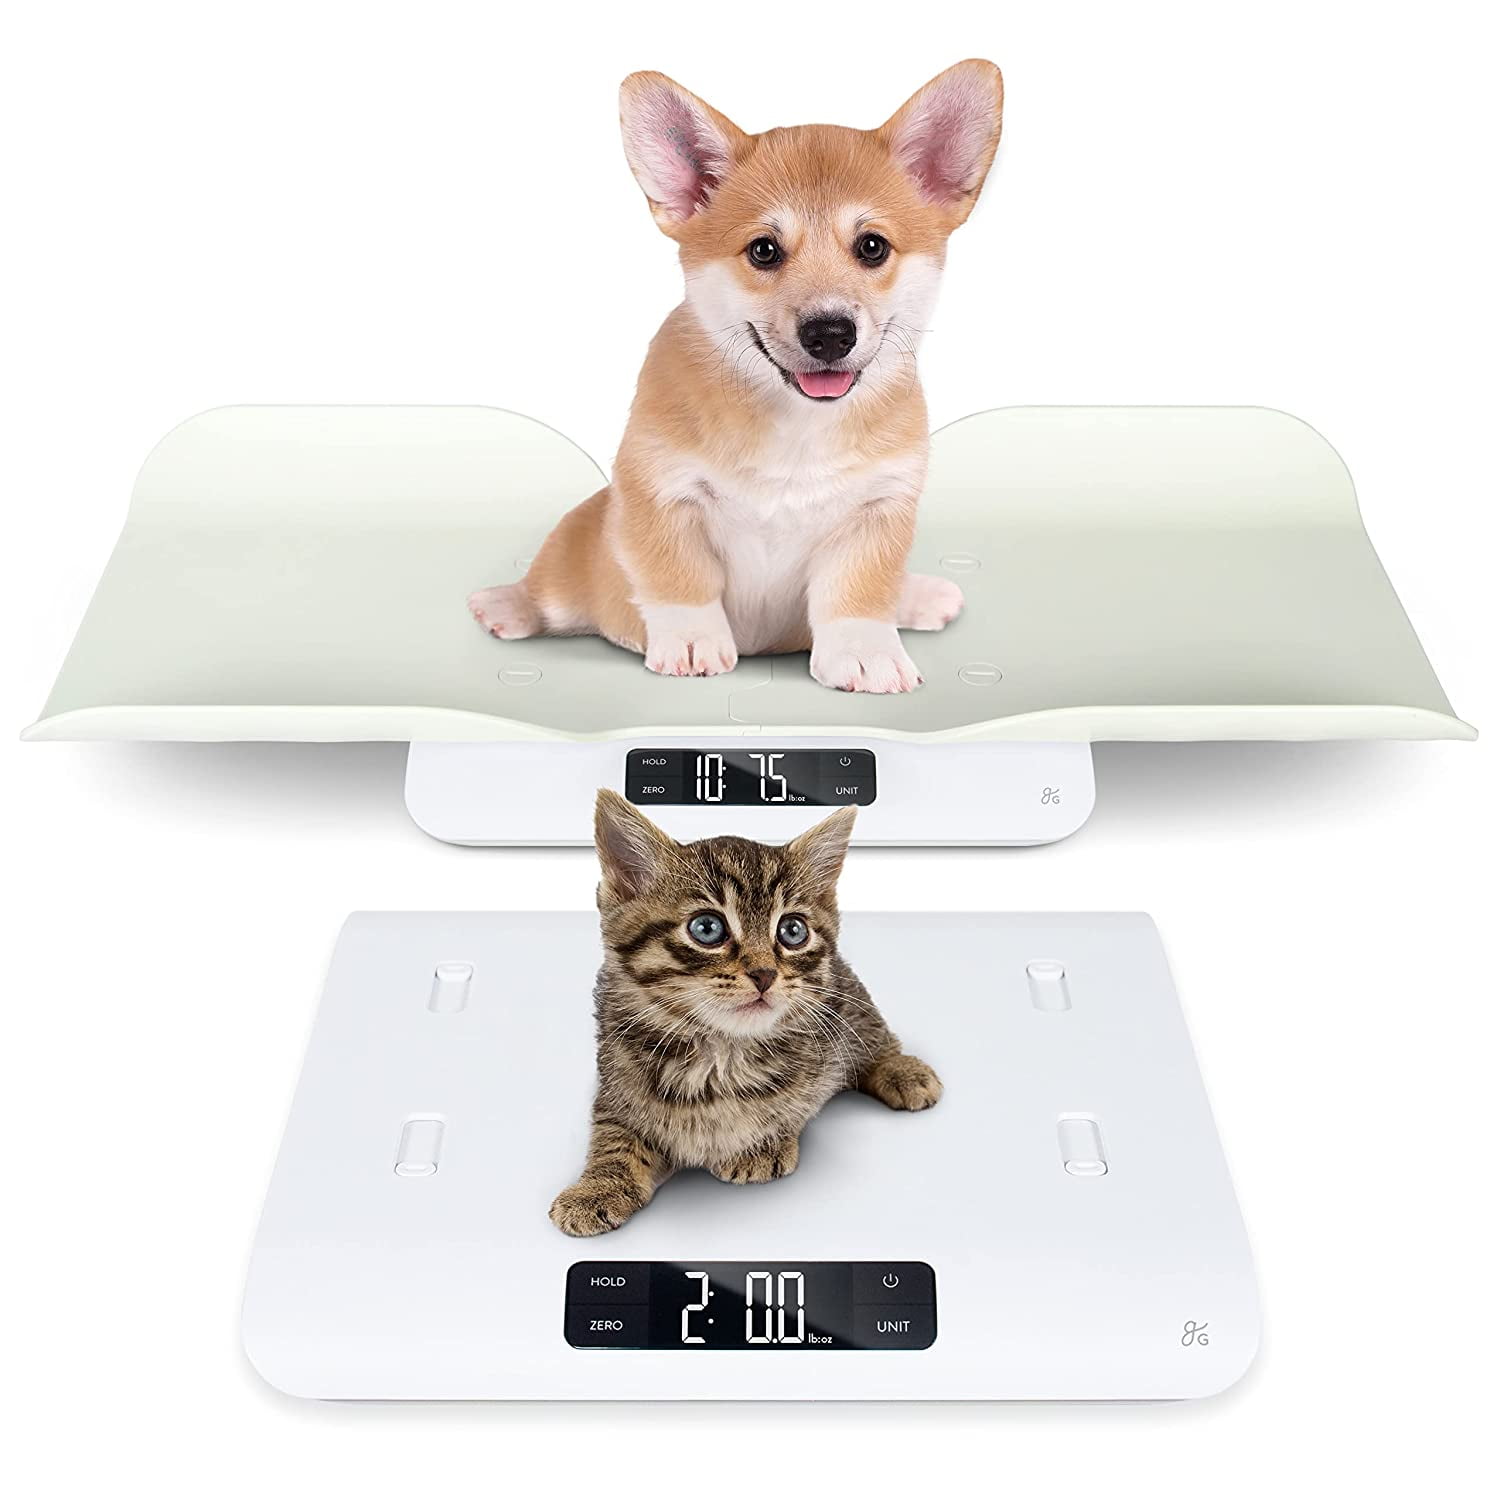 YTCYKJ Digital Pet Scale, Multi-function LED Scale Digital Weight with Height Tray Measure Accurately, Perfect for Puppy/Kitty/Hamster/Hedgehog/Food Kitchen